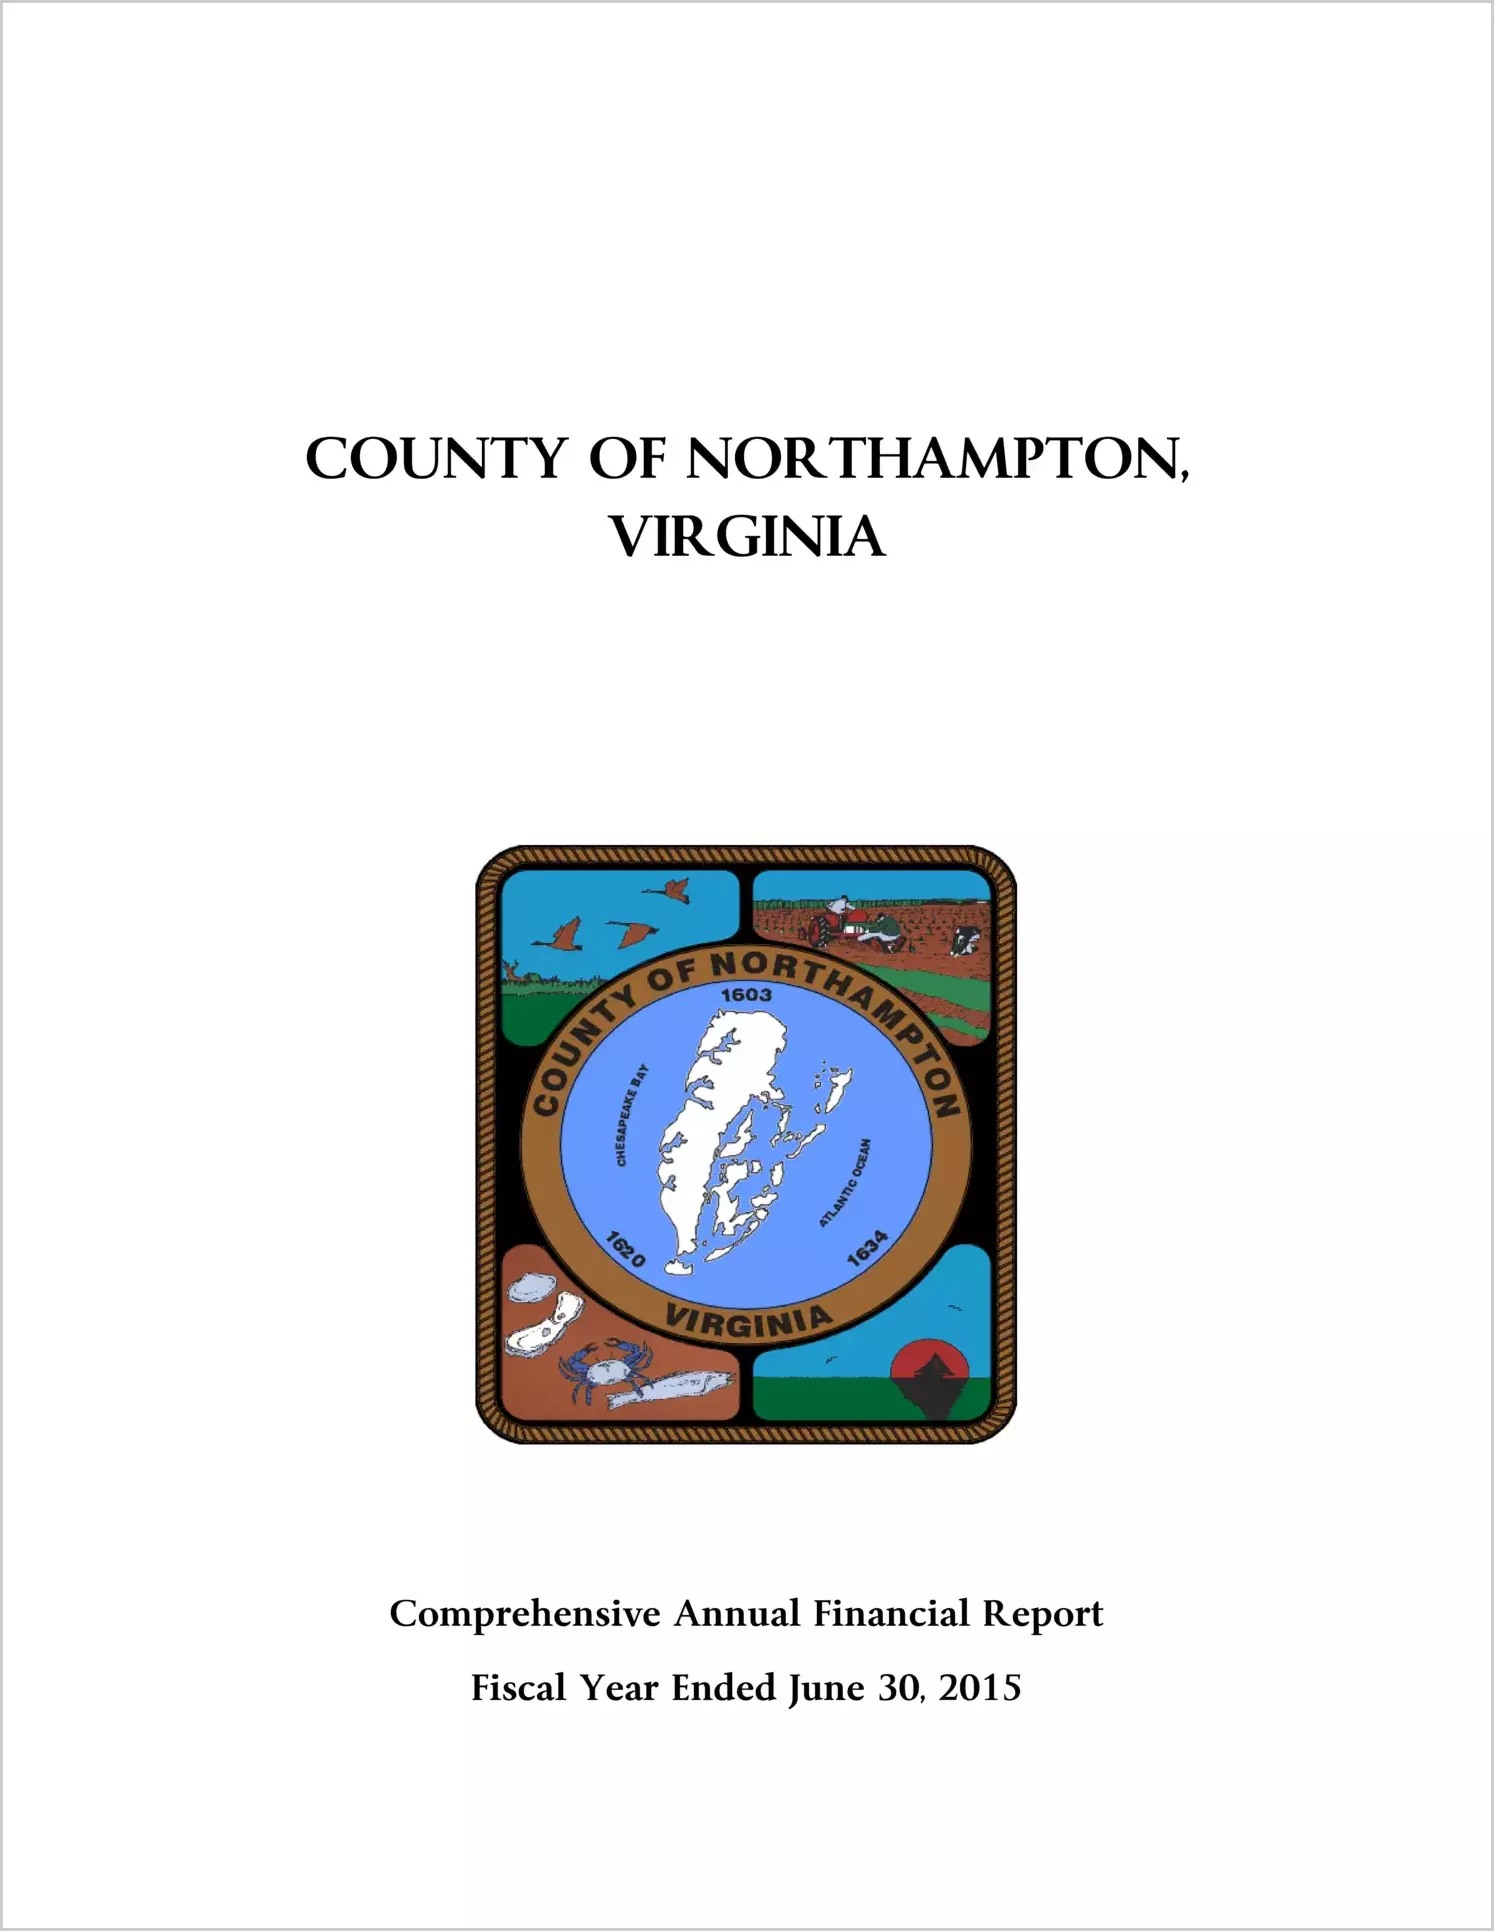 2015 Annual Financial Report for County of Northampton